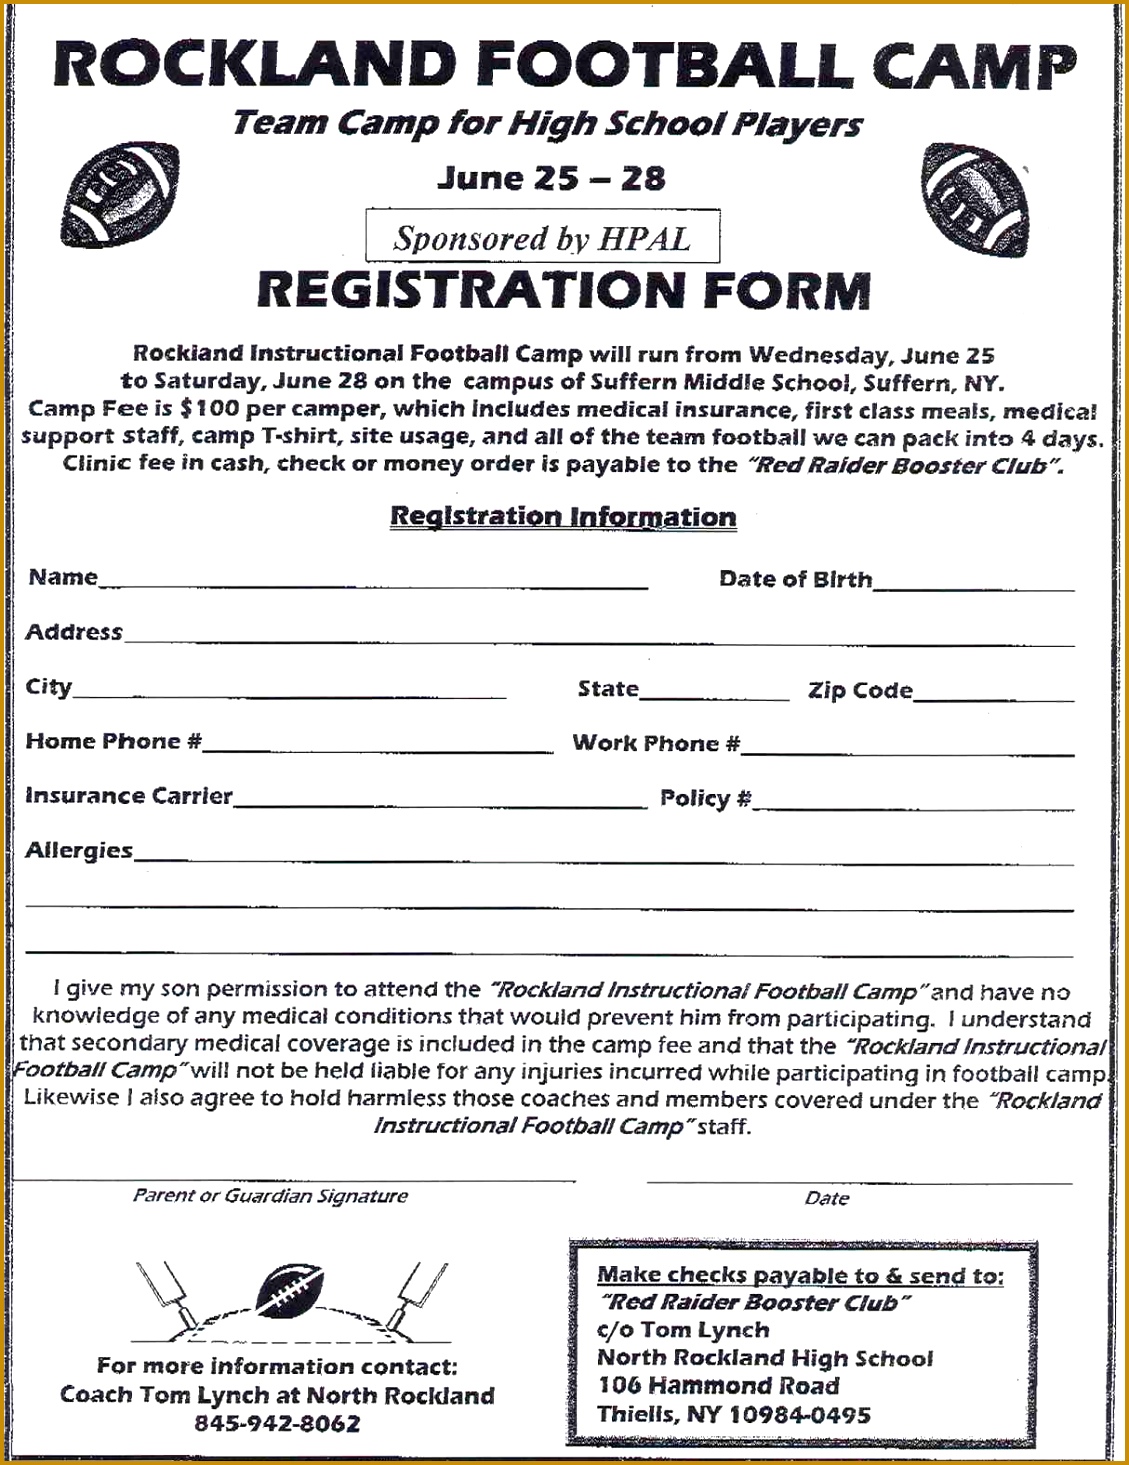 Registration Form Template registration form legal forms and business templates indemnity line card template cost estimate 14651129